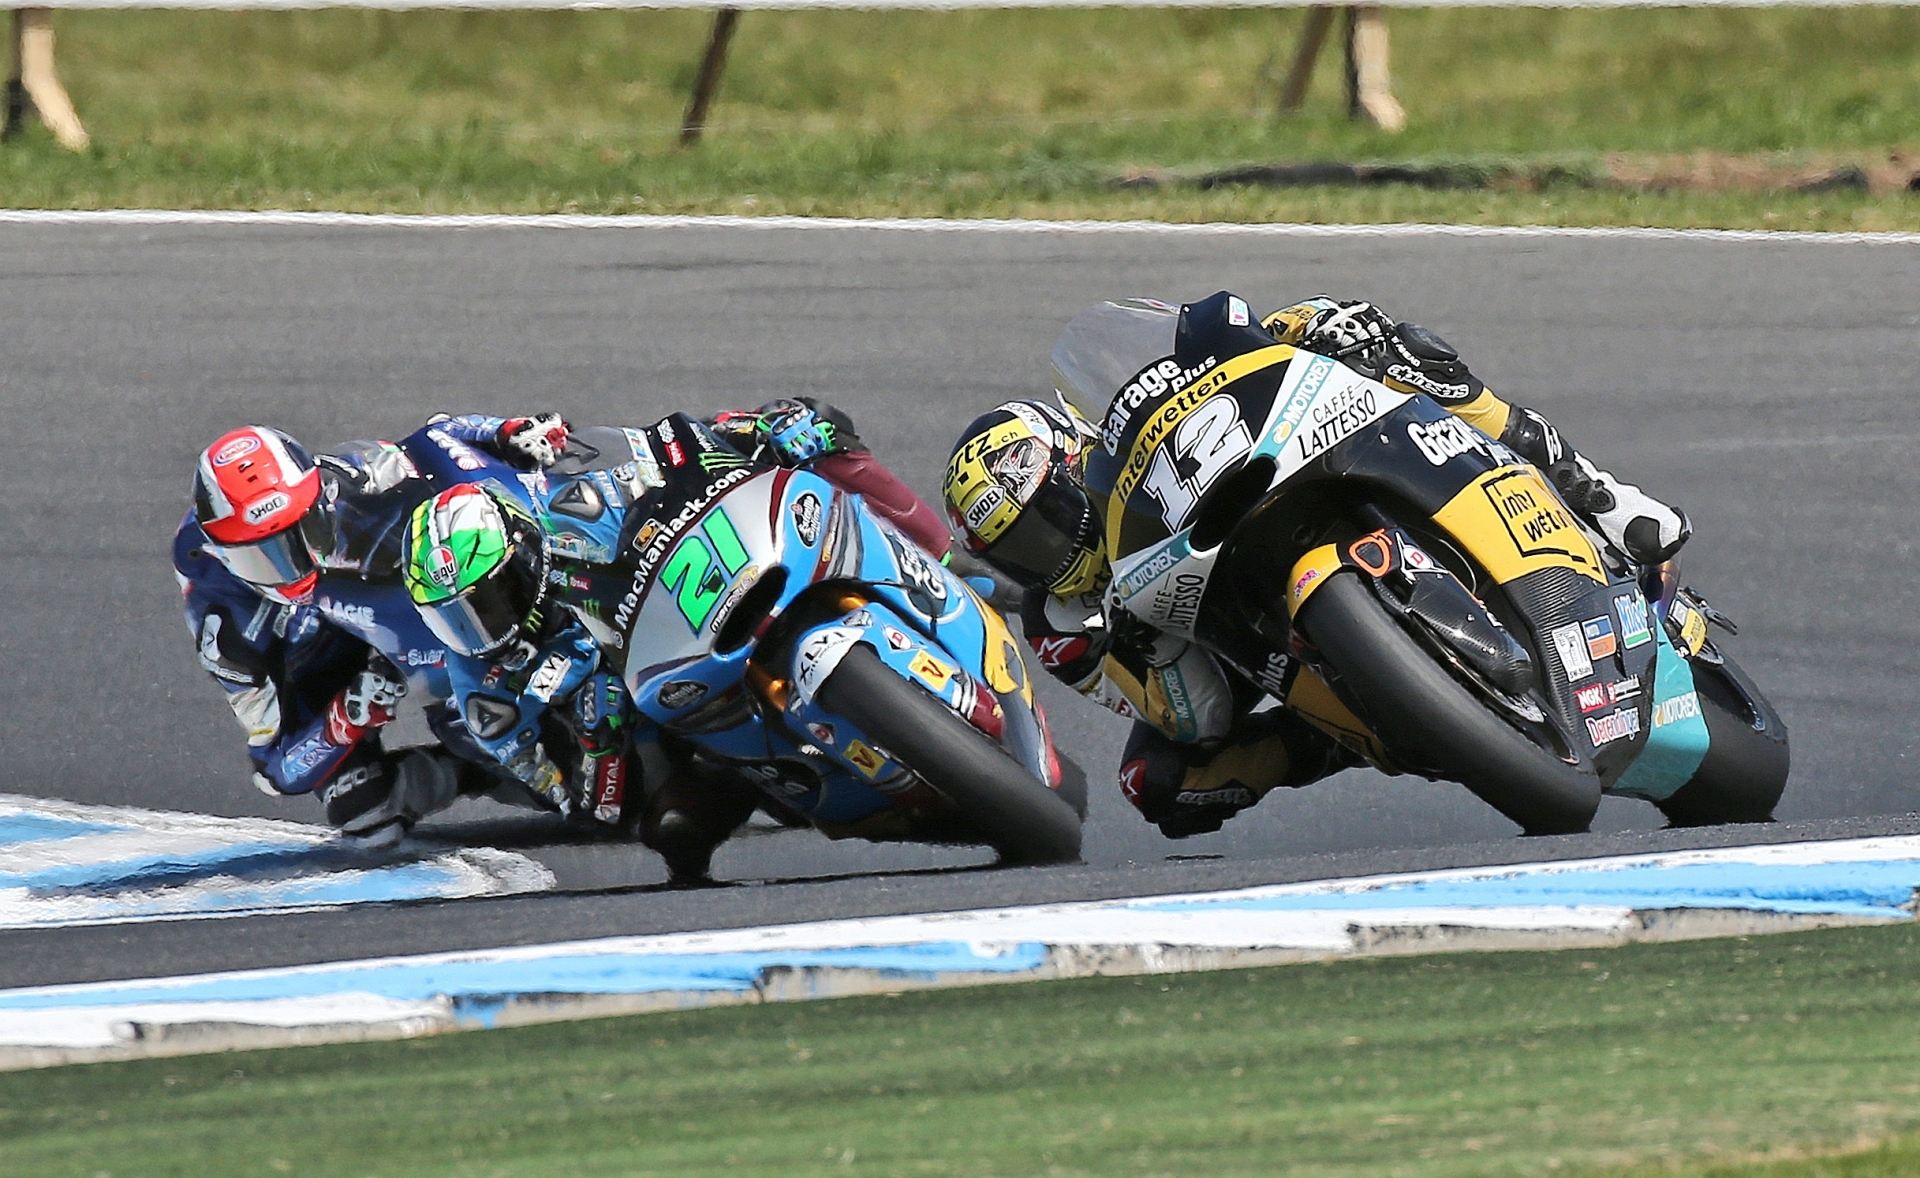 Moto2 riders Thomas Luthi of Switzerland, right, leads Franco Morbidelli of Italy through turn 10 during the 2016 Australian Motorcycle Grand Prix at Phillip Island near Phillip Island, Australia, Sunday, Oct. 23, 2016. (AP Photo/Rob Griffith) Australia MotoGP Motorcycle Racing